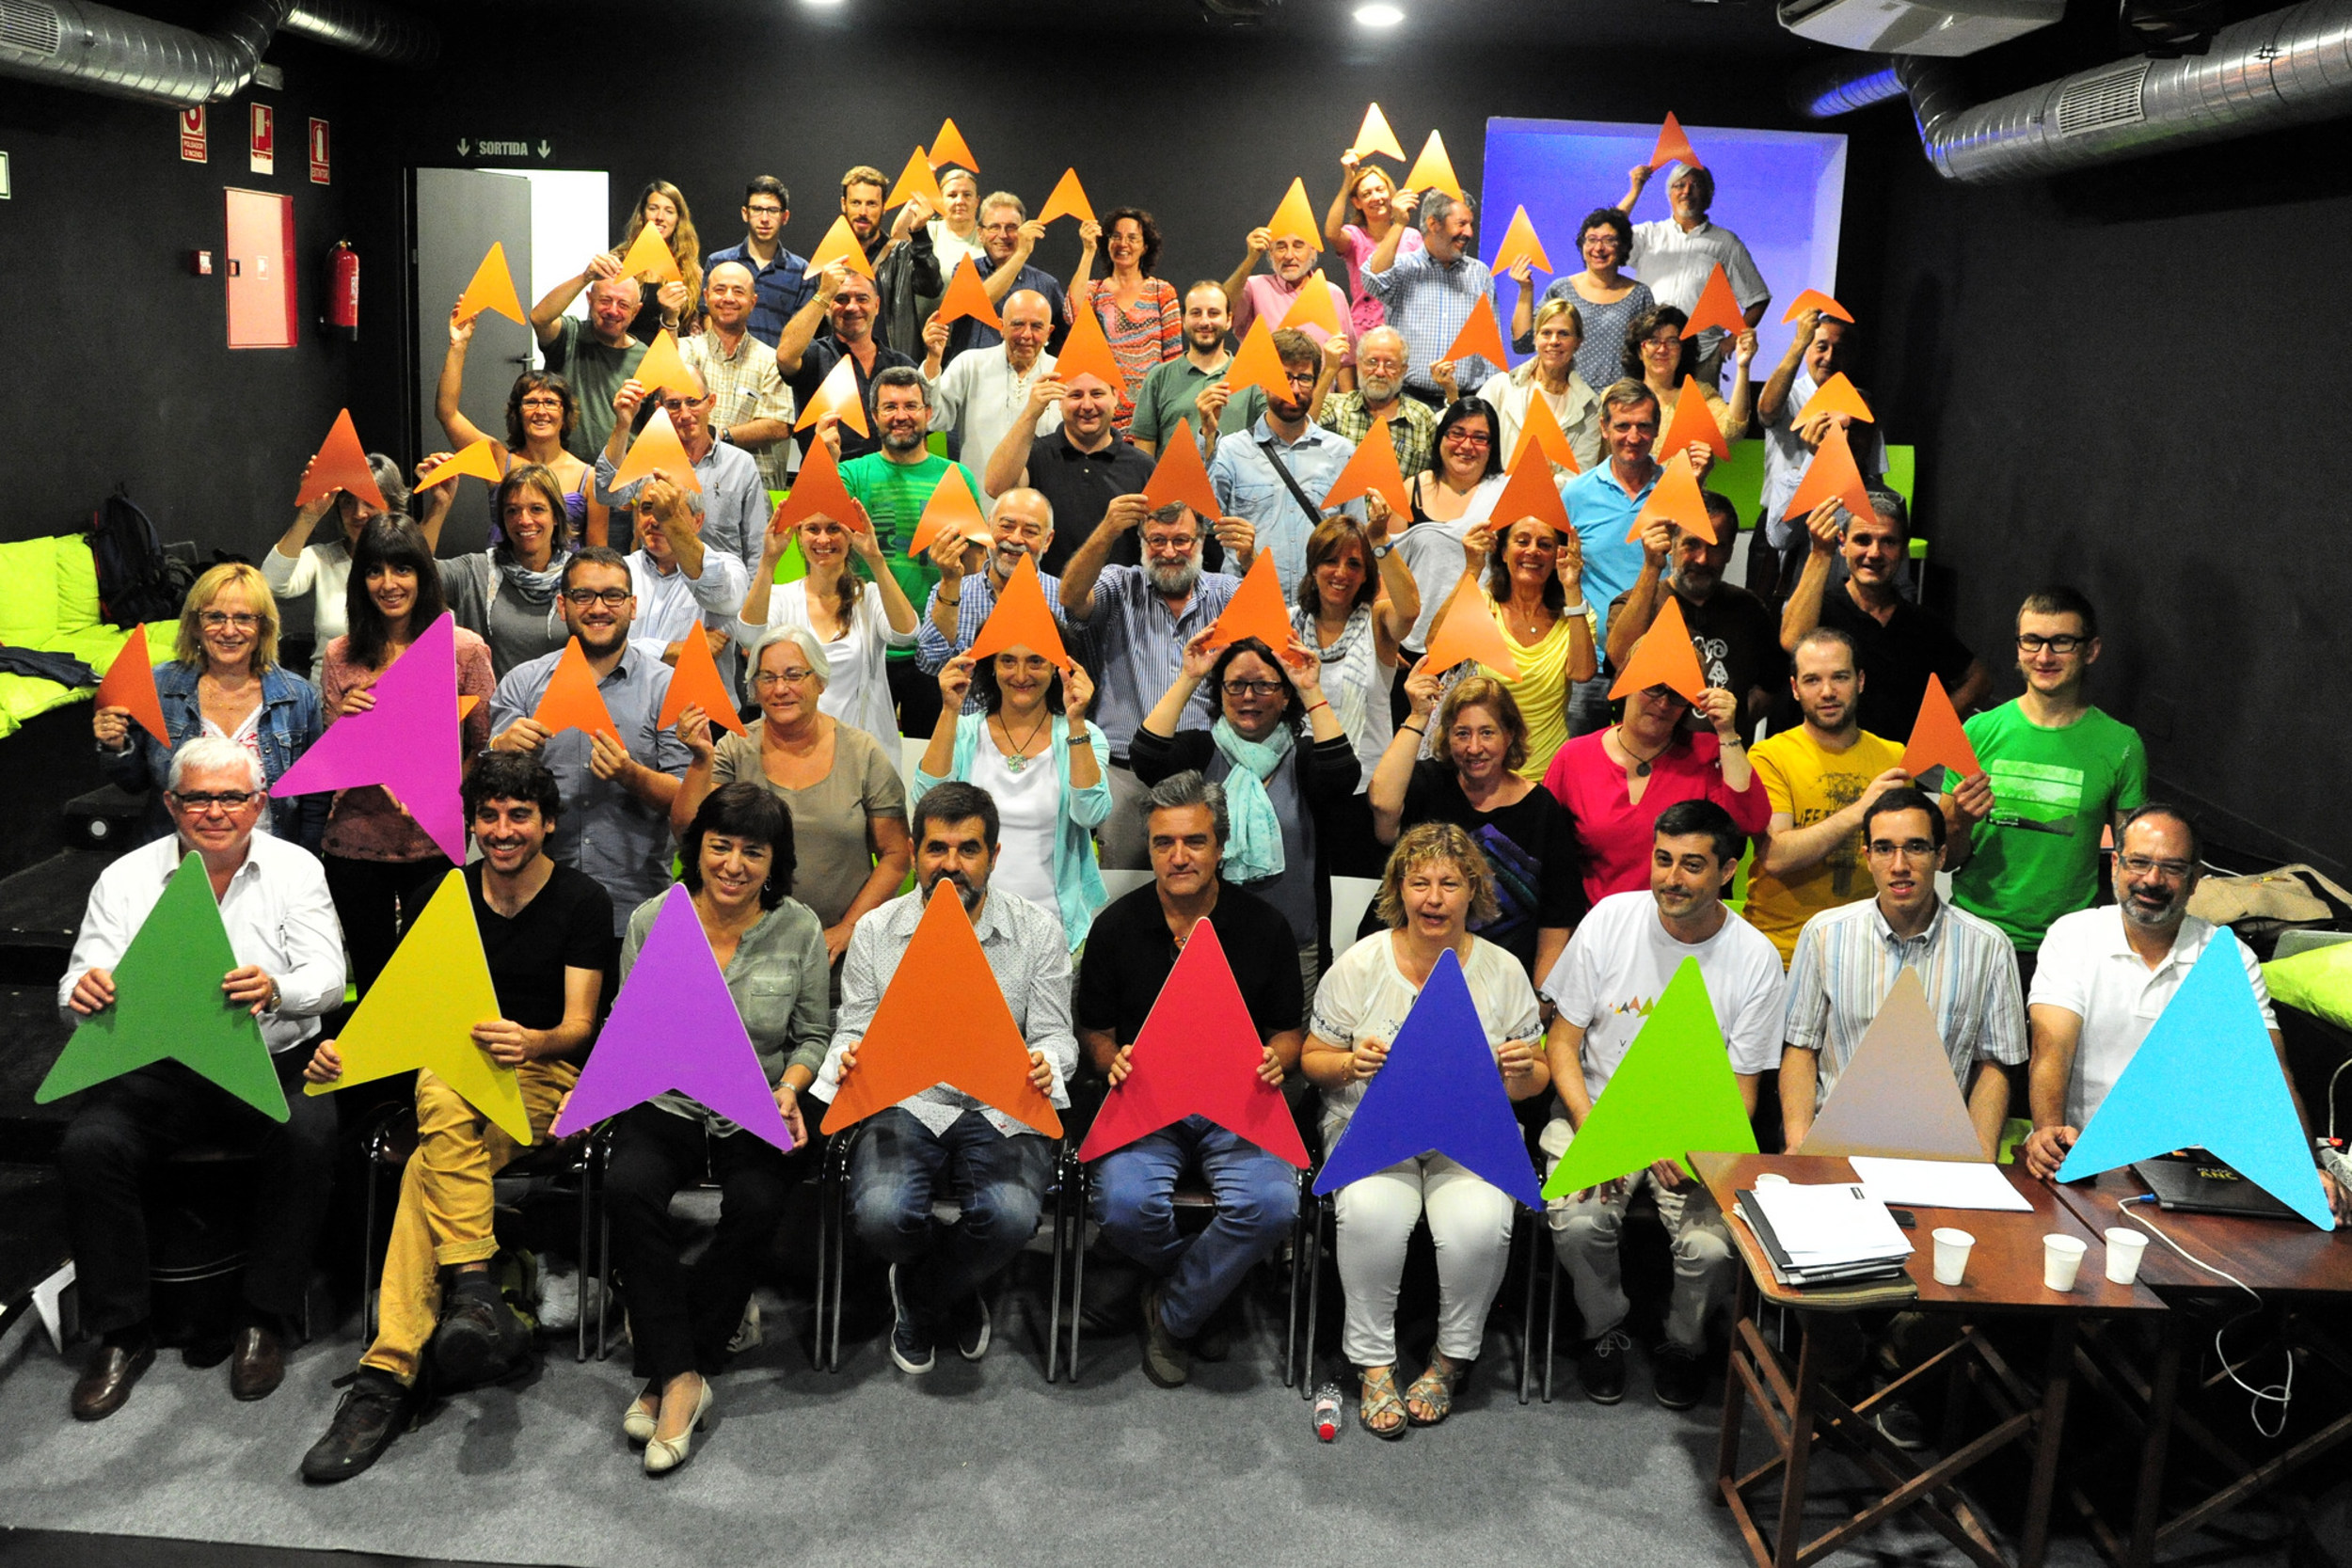 Members of the Catalan National Assembly (ANC) holding the coloured pointers that will be used in 'Via Lliure'